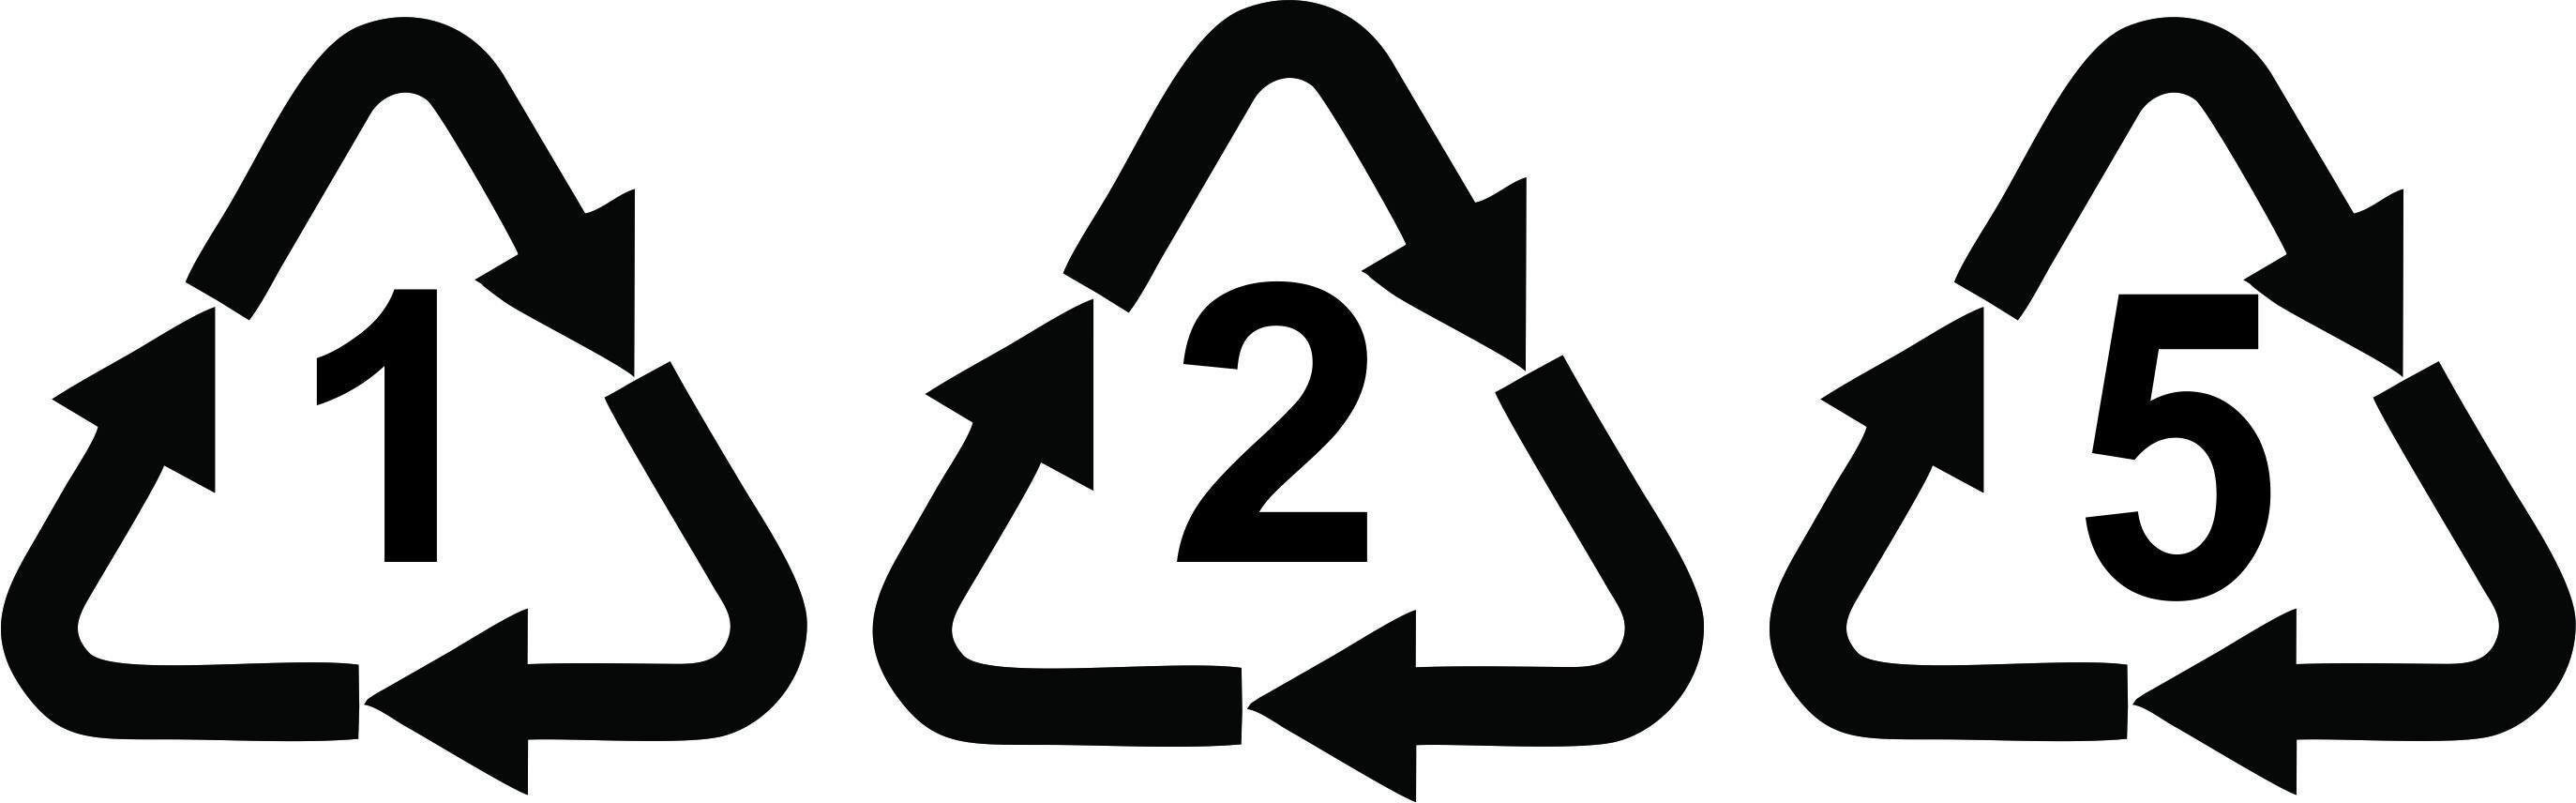 Symbol for type 1, 2 and 5 plastics. Three chasing arrow symbols in a triangle shape with the numbers 1, 2 and 5 in the center